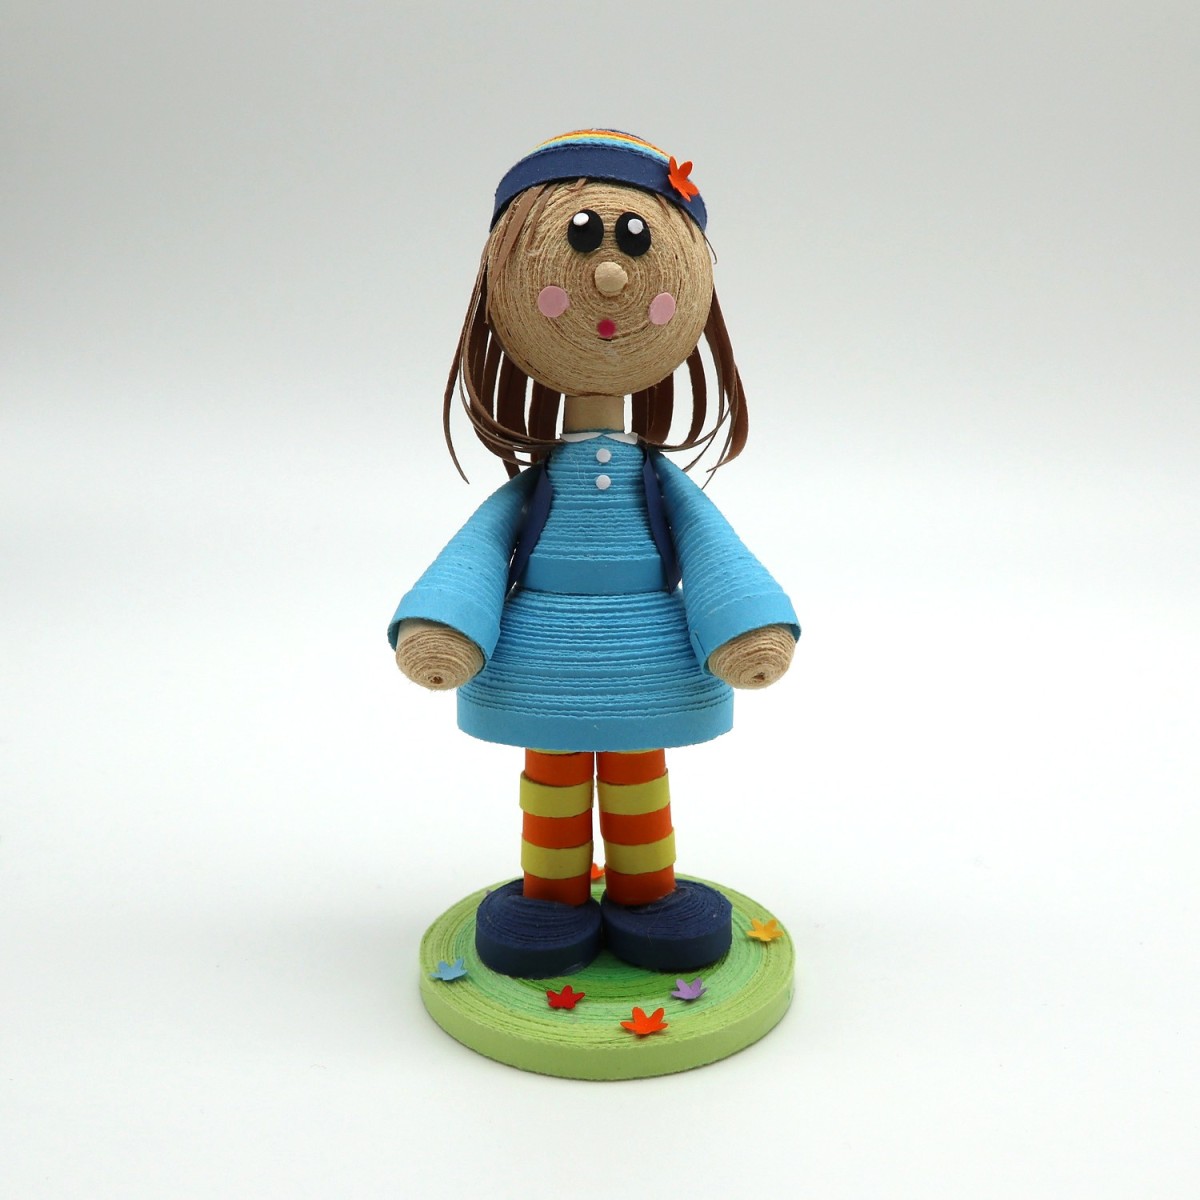 robuschi personnage quilling 2021-11-11